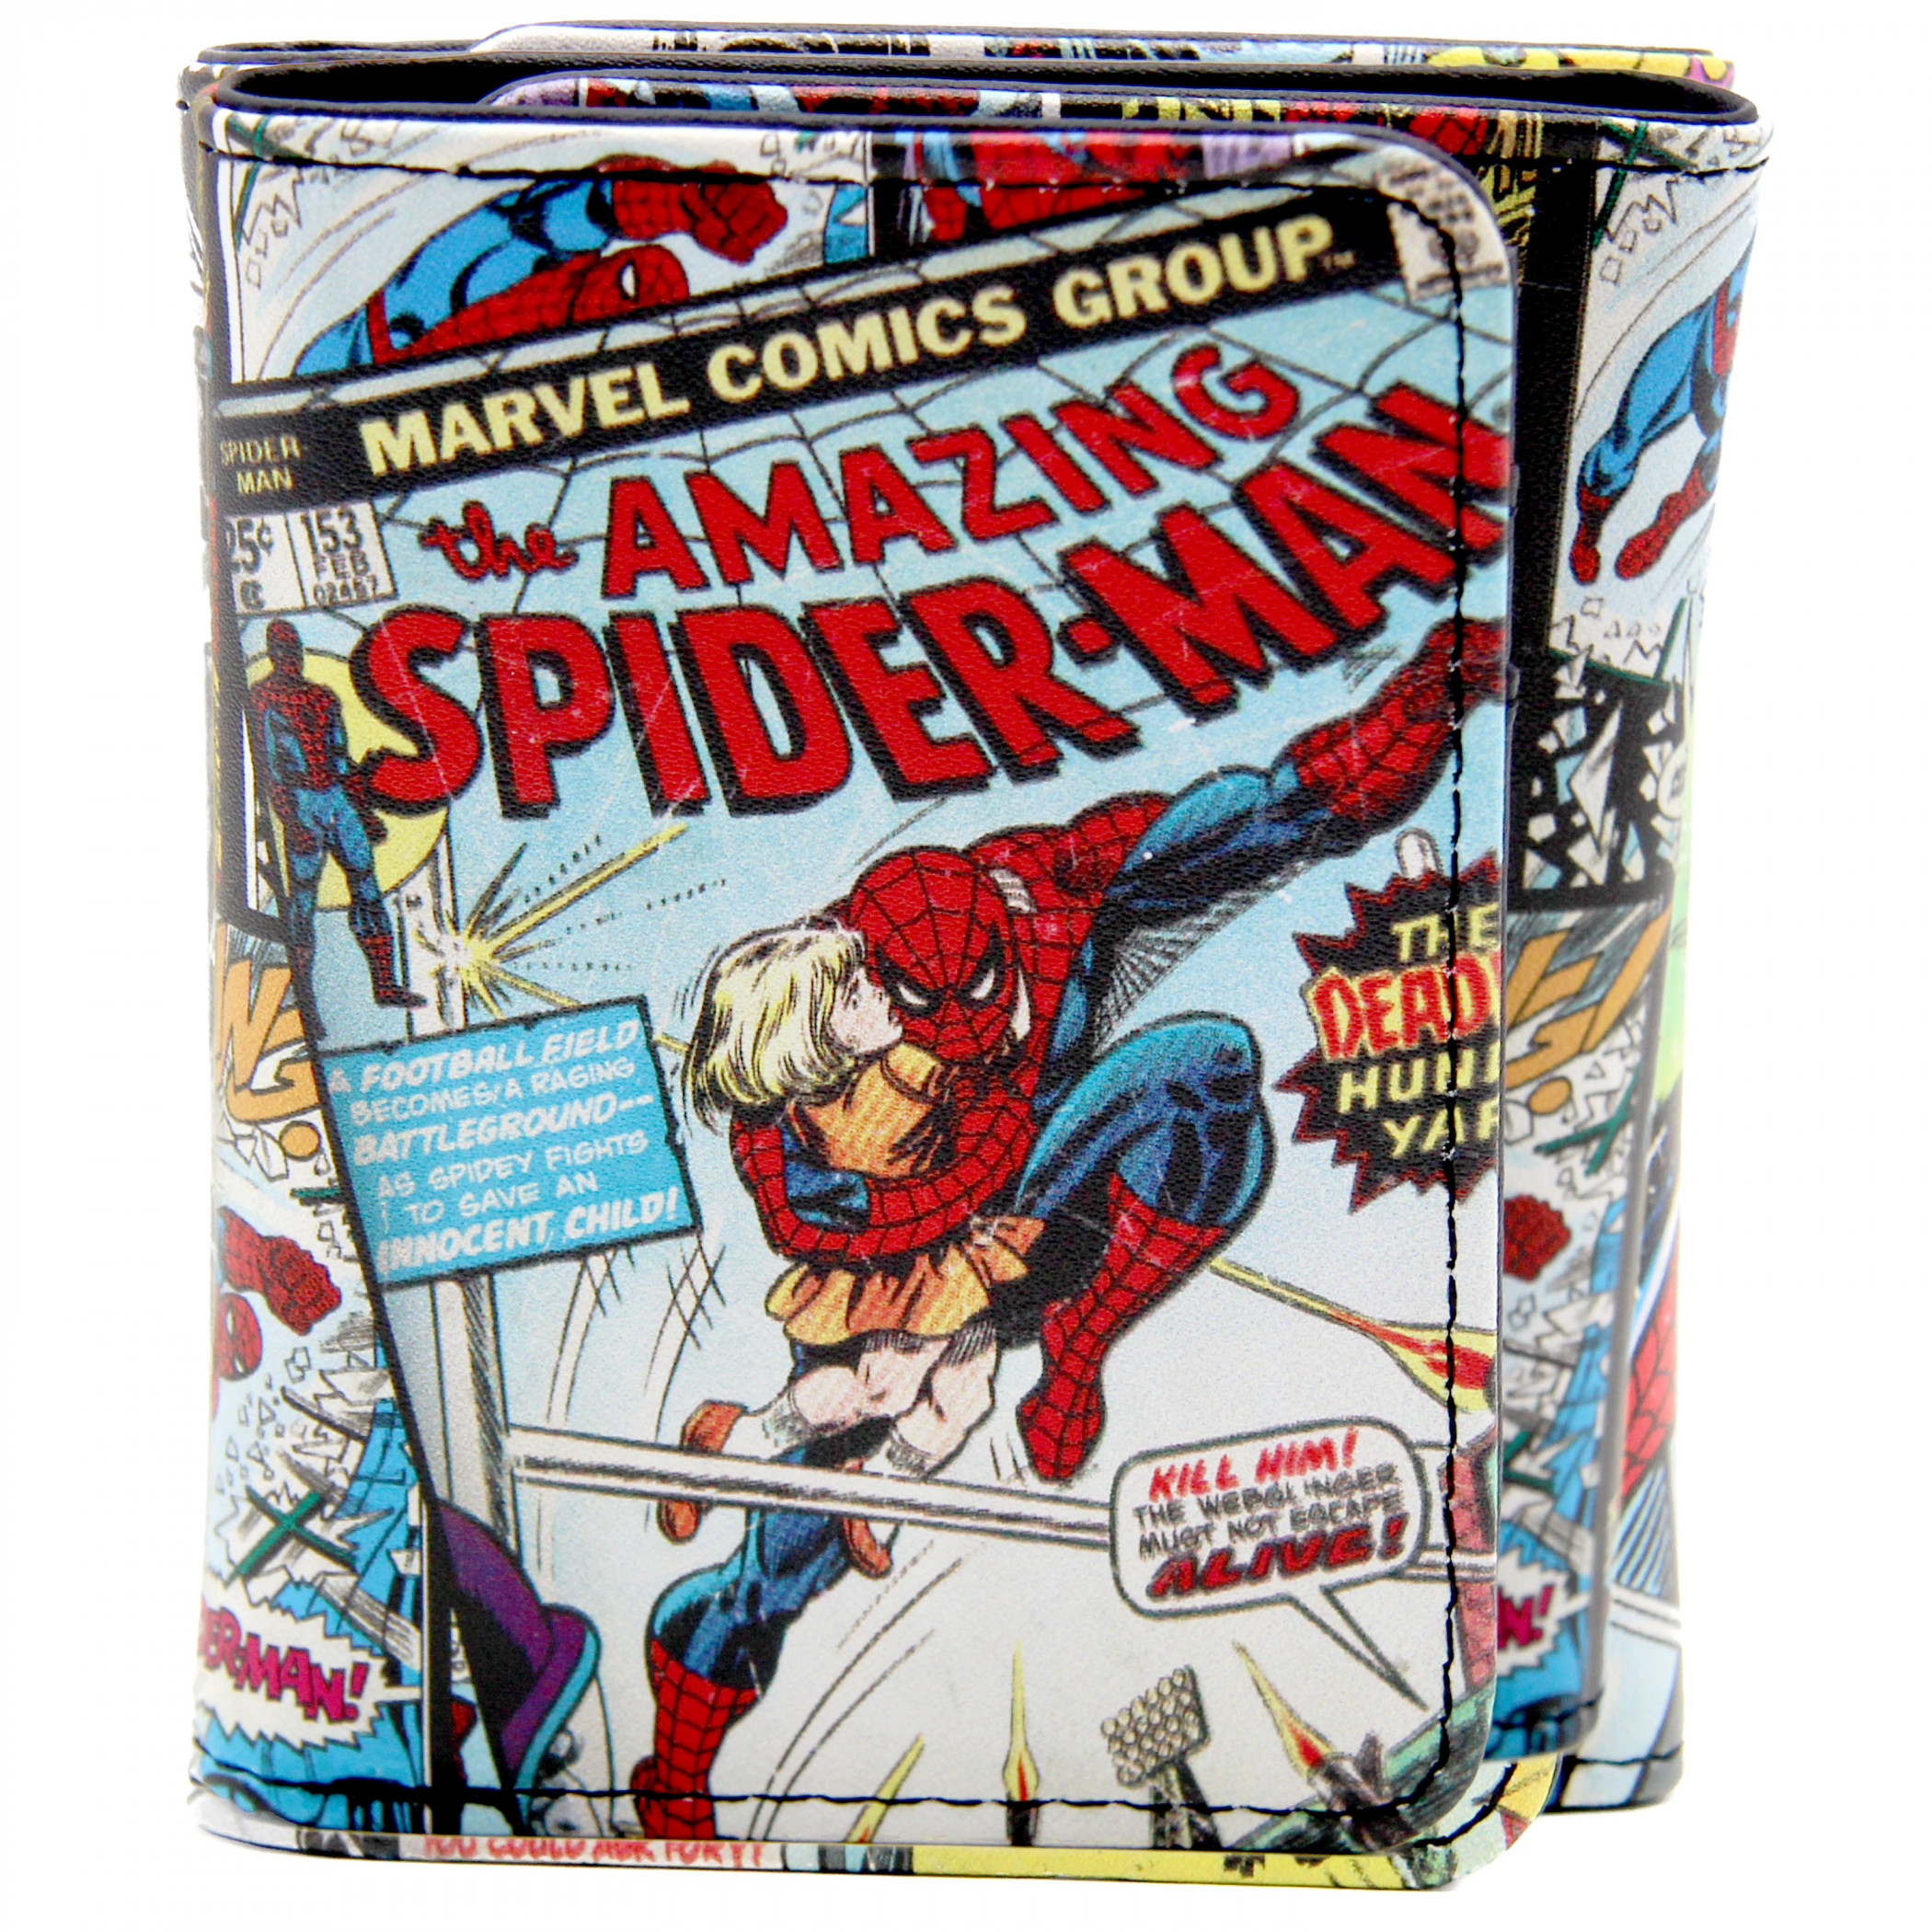 Spider-Man #153 Comic Cover Trifold Wallet in Collectors Tin